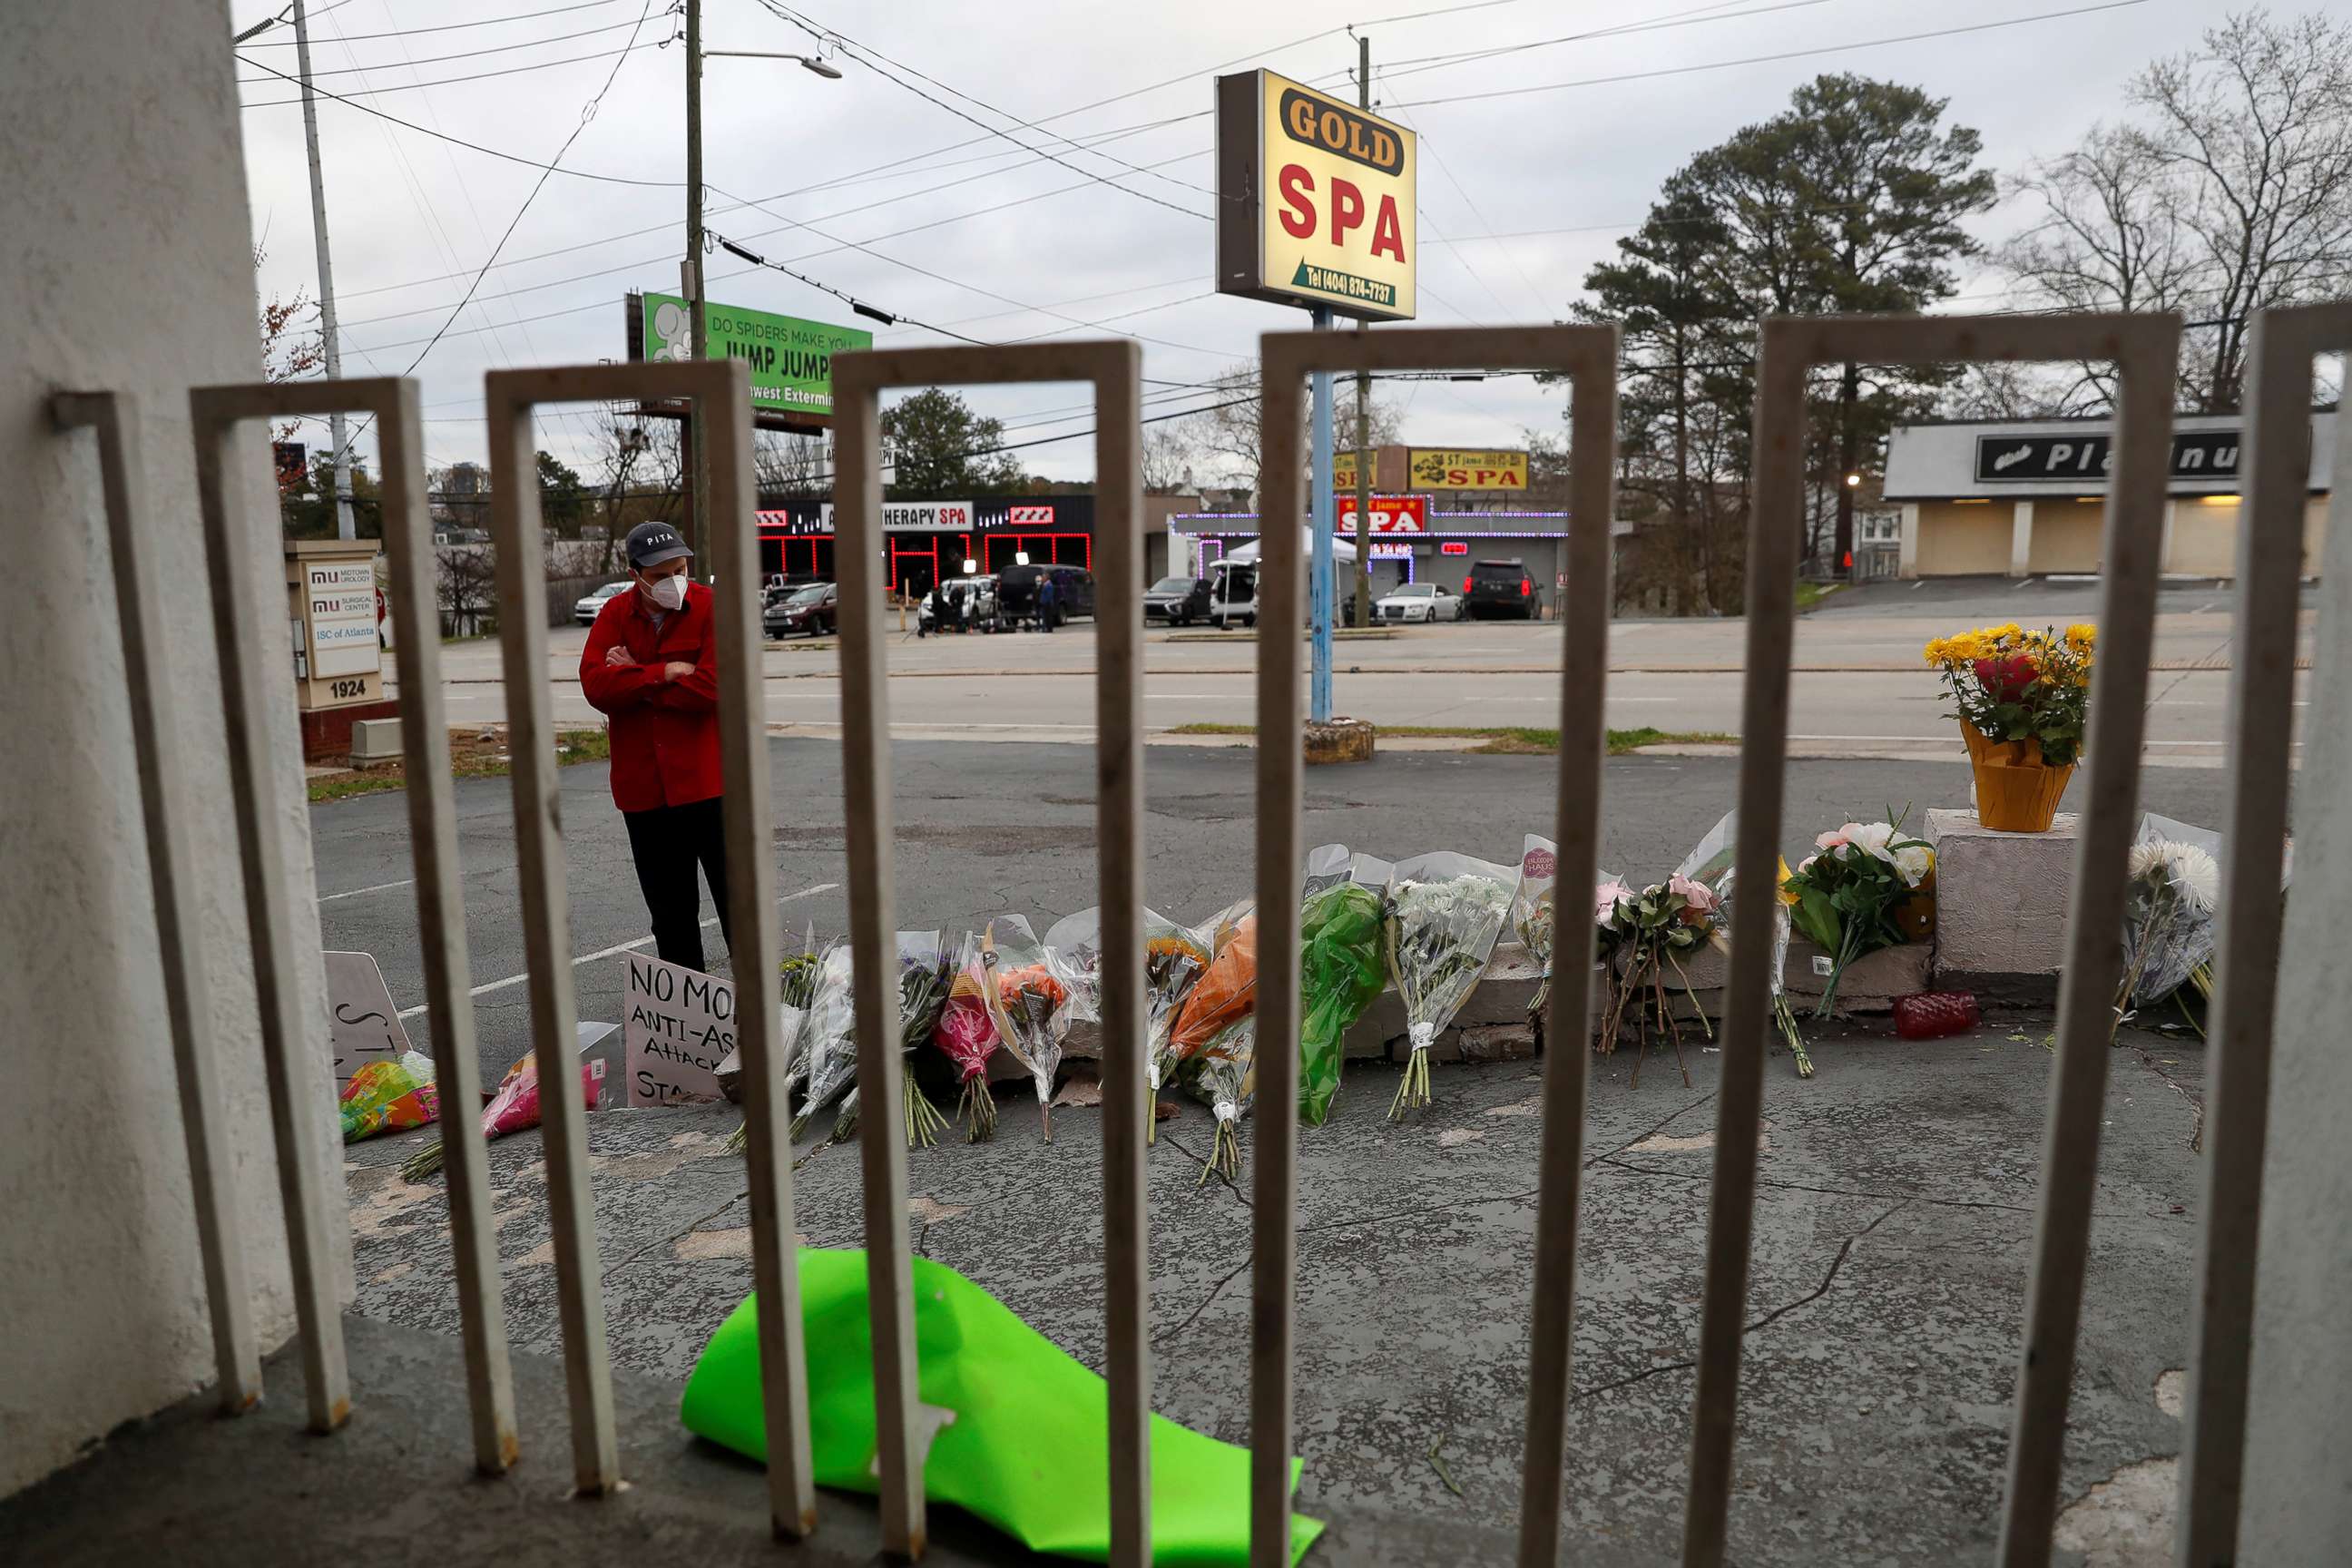 PHOTO: Sasha Hasanbegovic looks down after laying flowers at a makeshift memorial outside the Gold Spa following the deadly shootings in Atlanta, March 19, 2021.